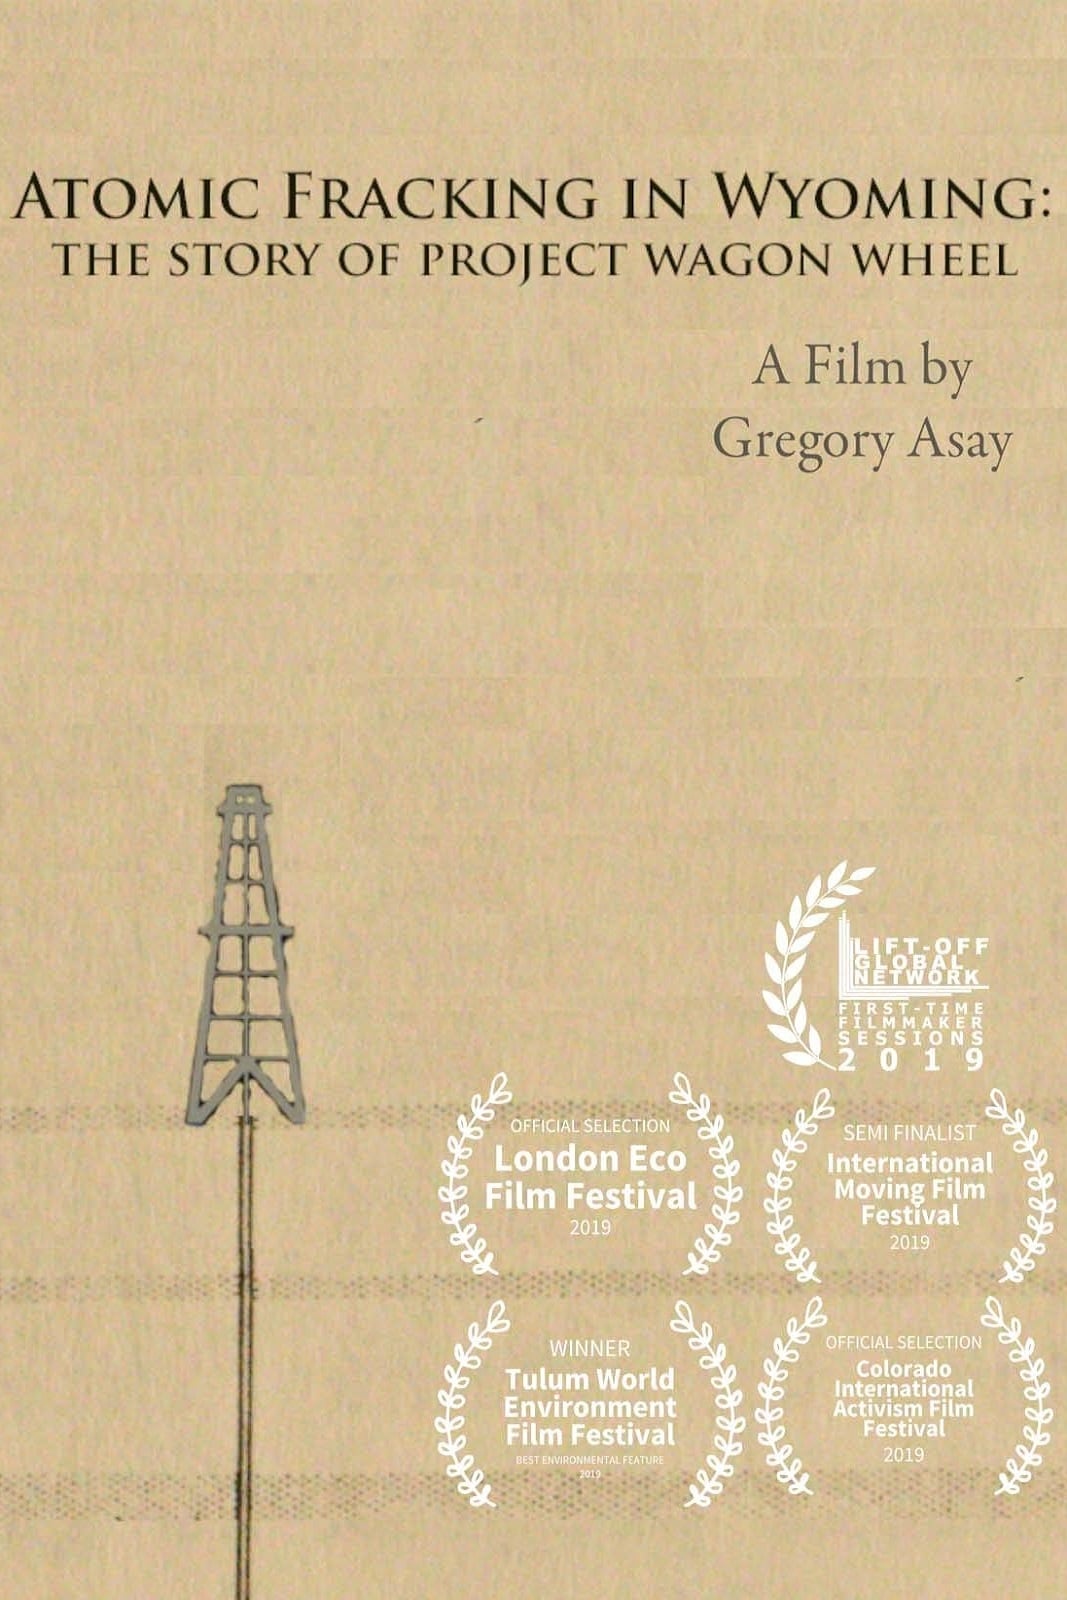 Atomic Fracking in Wyoming: The Story of Project Wagon Wheel